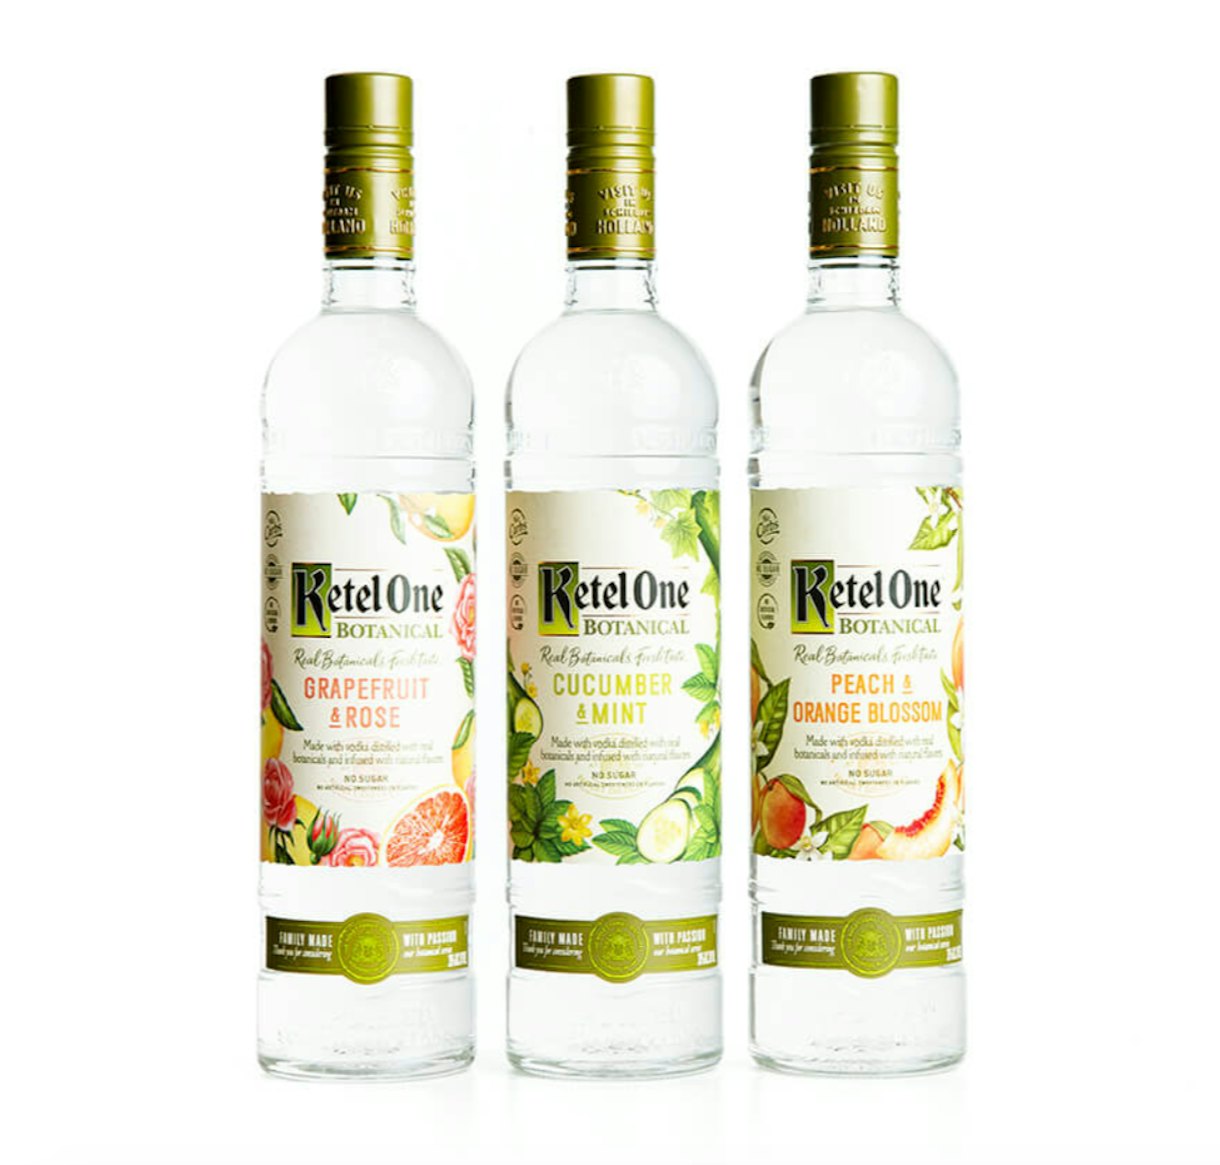 Ketel One Botanical Friendsgiving Essentials Kit Is Just What Your ...